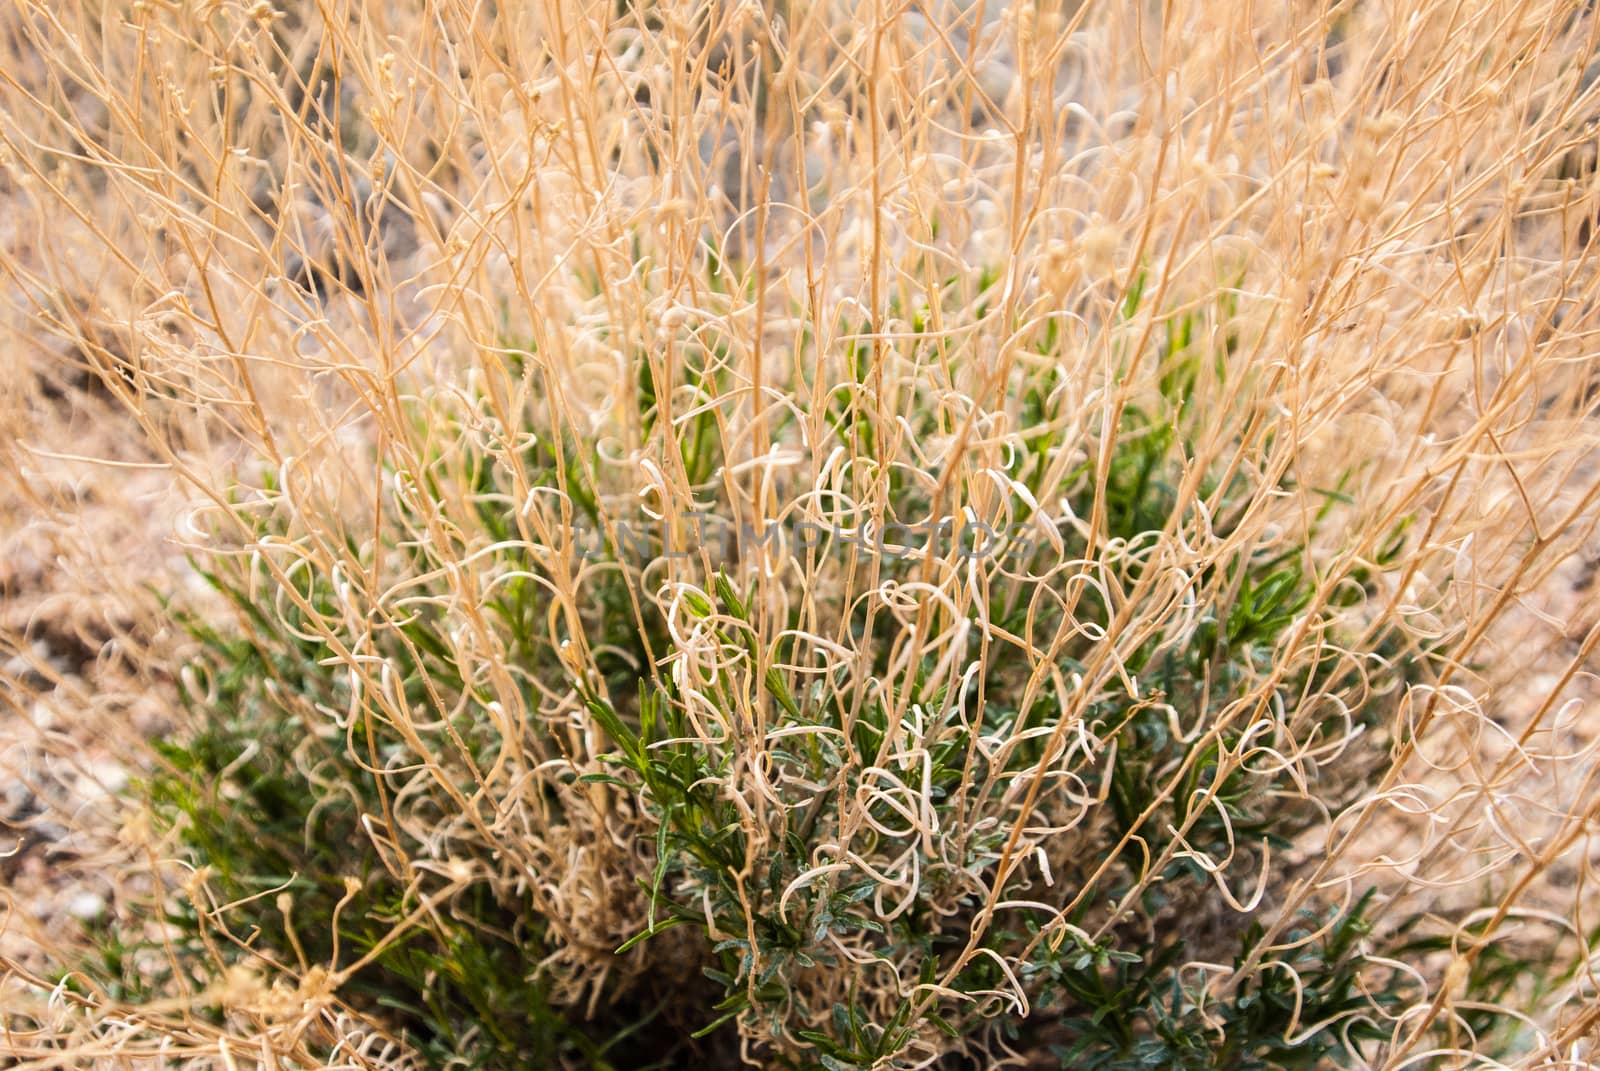 Curly grasses survive the drought by emattil